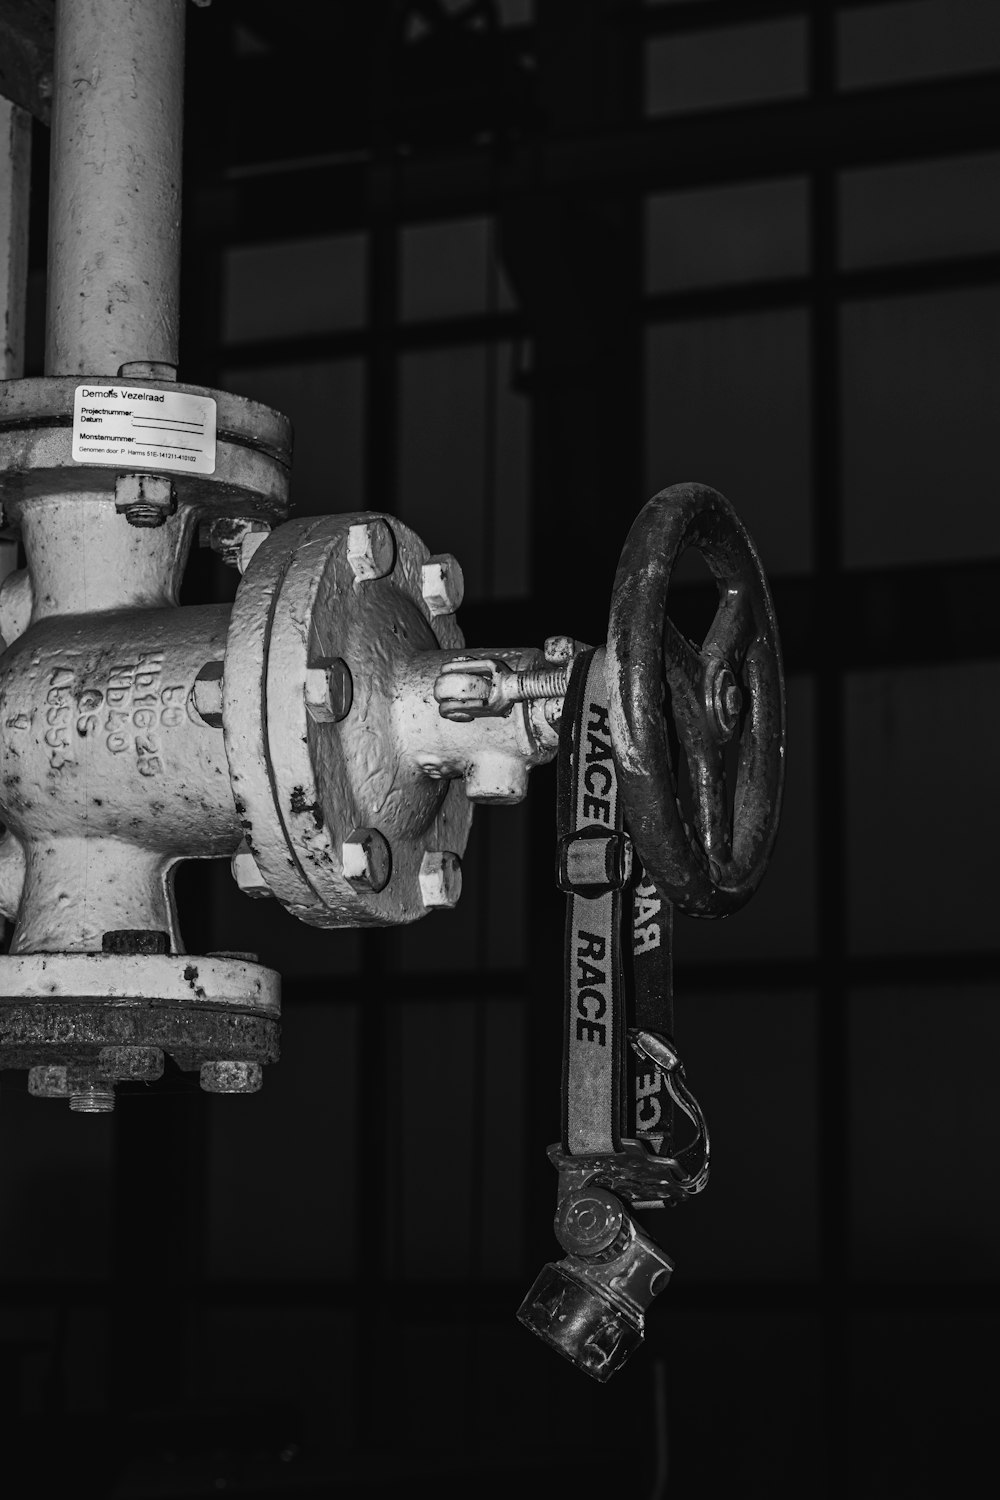 a black and white photo of a fire hydrant